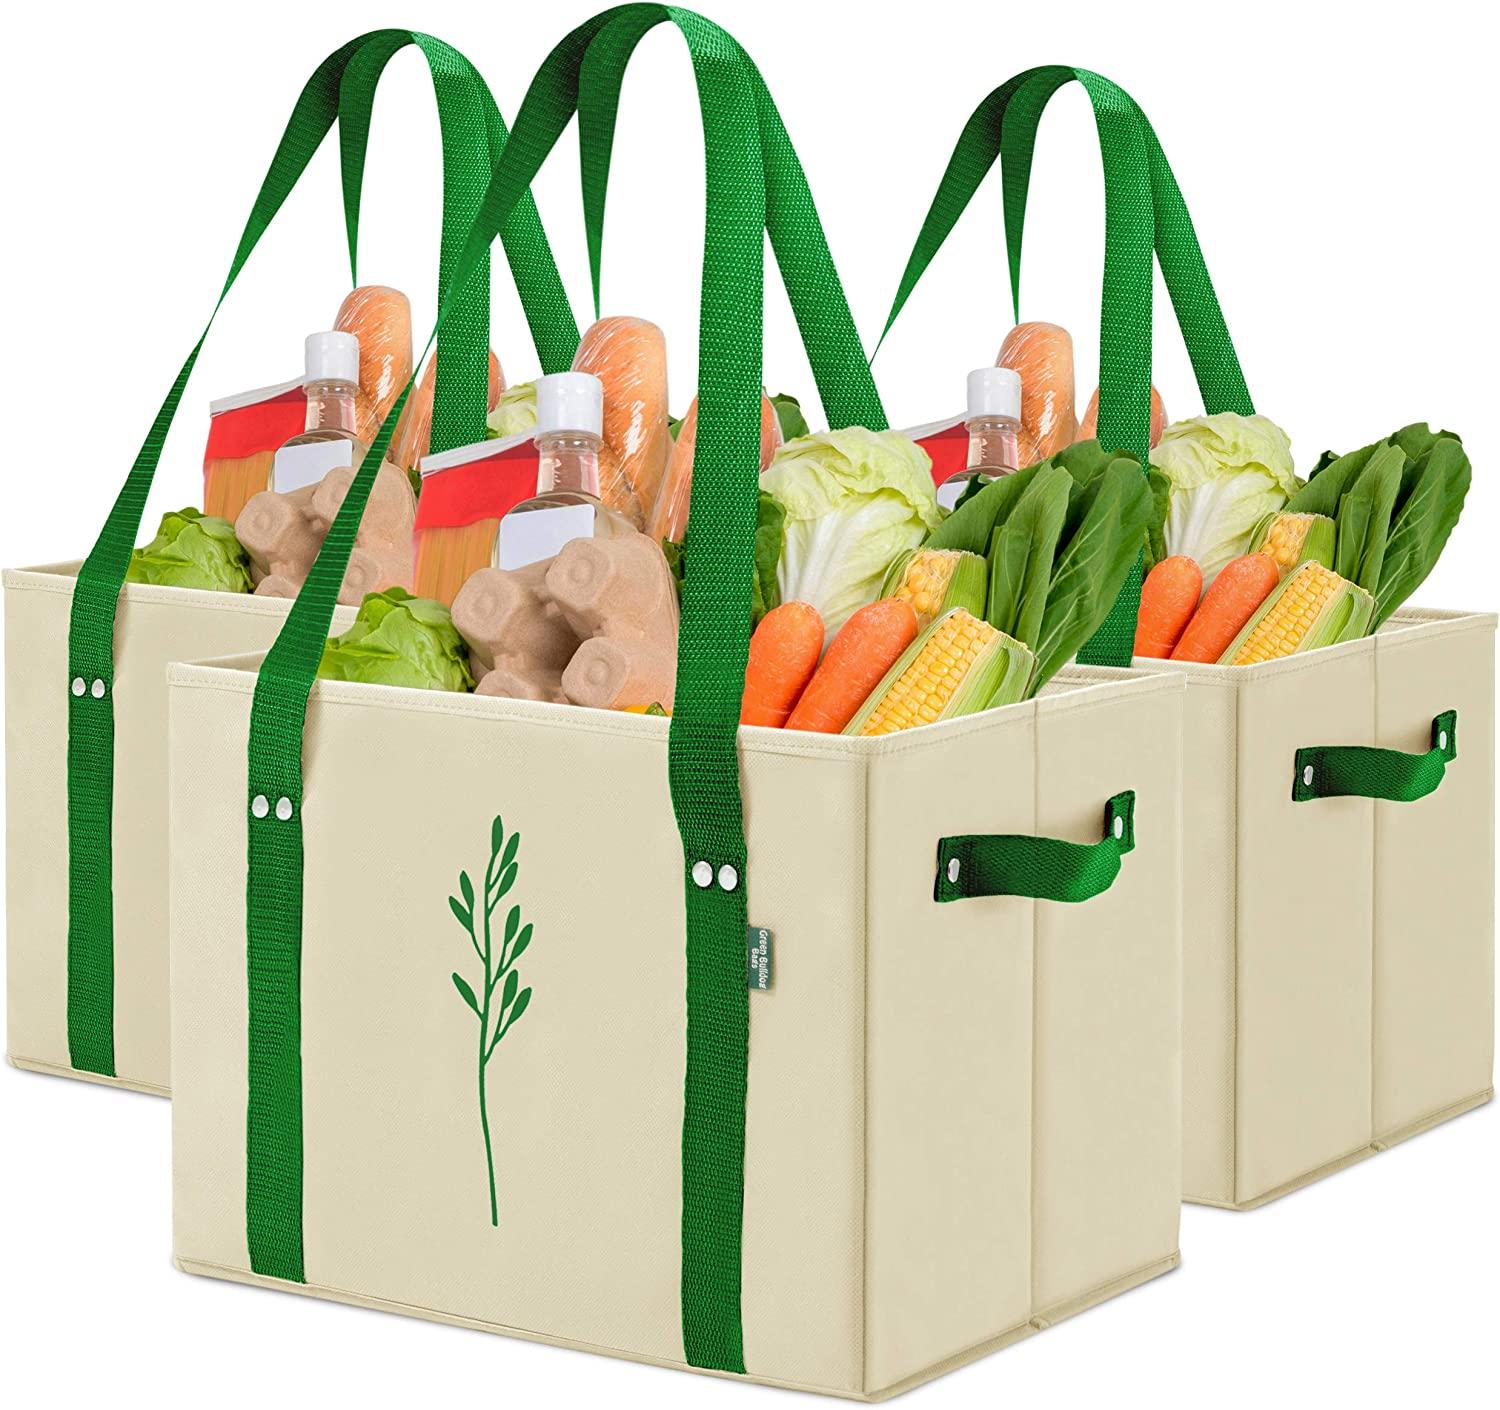 Green Bulldog Reusable Grocery Bags 3 Pack for $17.57